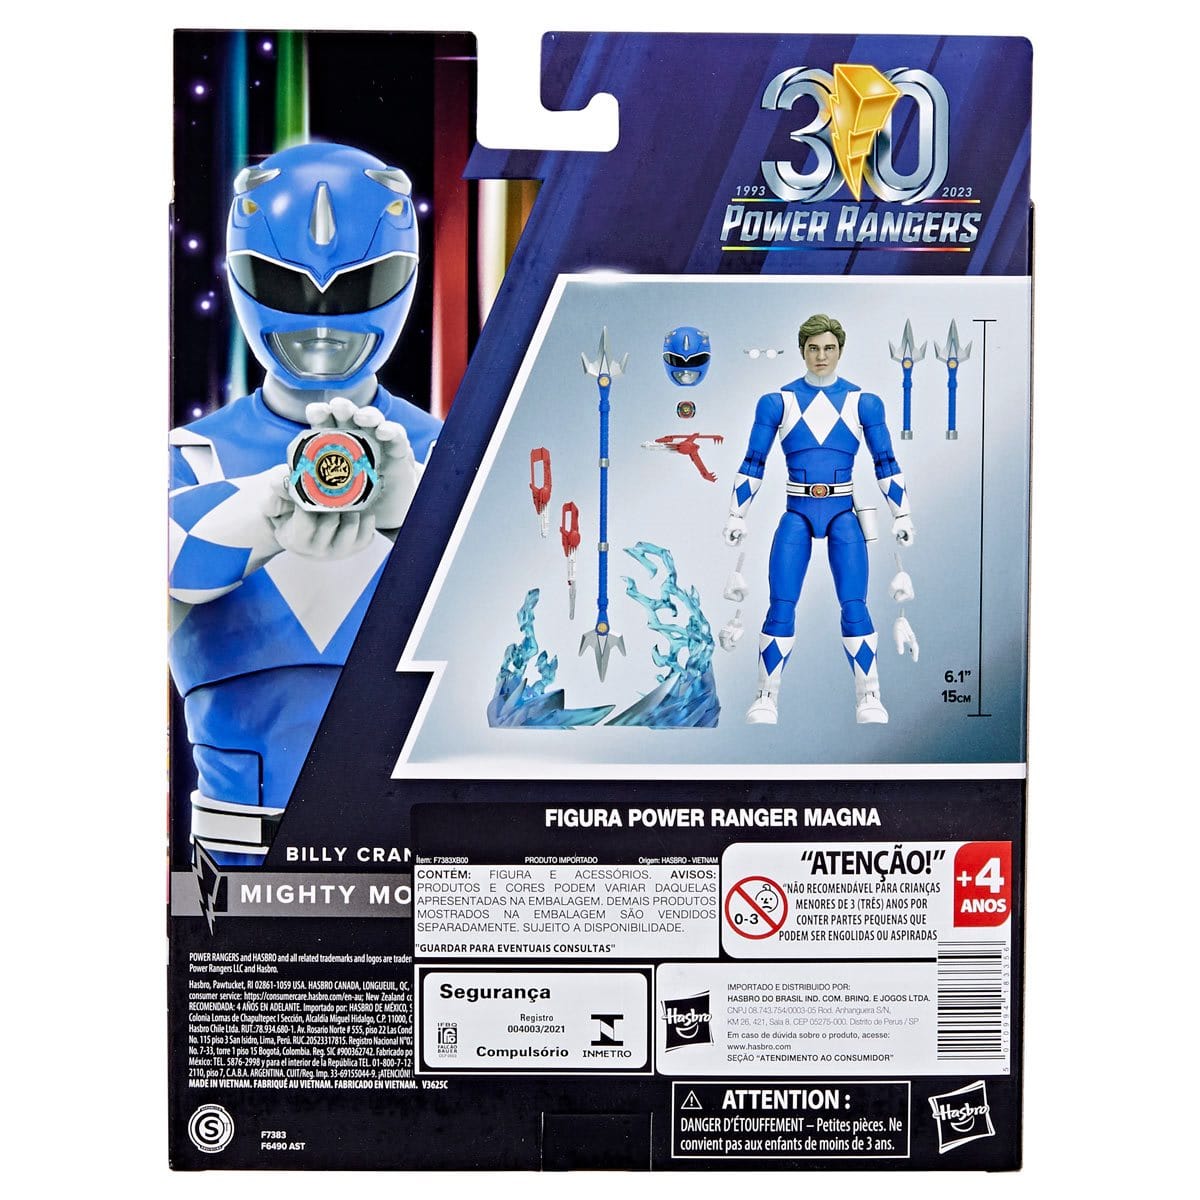 Power Rangers Lightning Collection Remastered Mighty Morphin Blue Ranger 6-Inch Action Figure - Exclusive